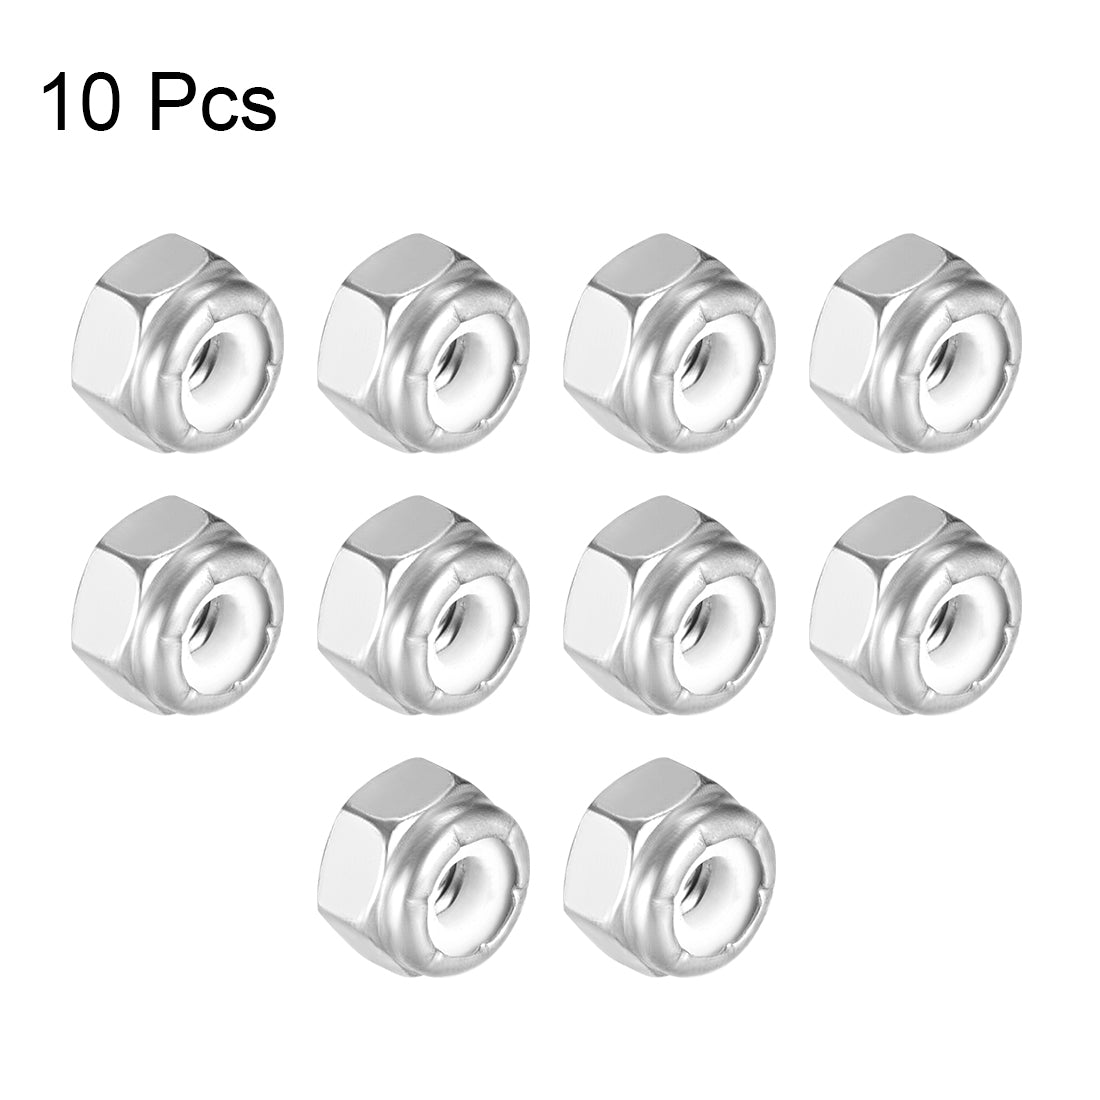 uxcell Uxcell 8#-32 Hex Lock Nuts Stainless Steel Nylon Insert Self-Lock Nuts, 10Pcs Silver